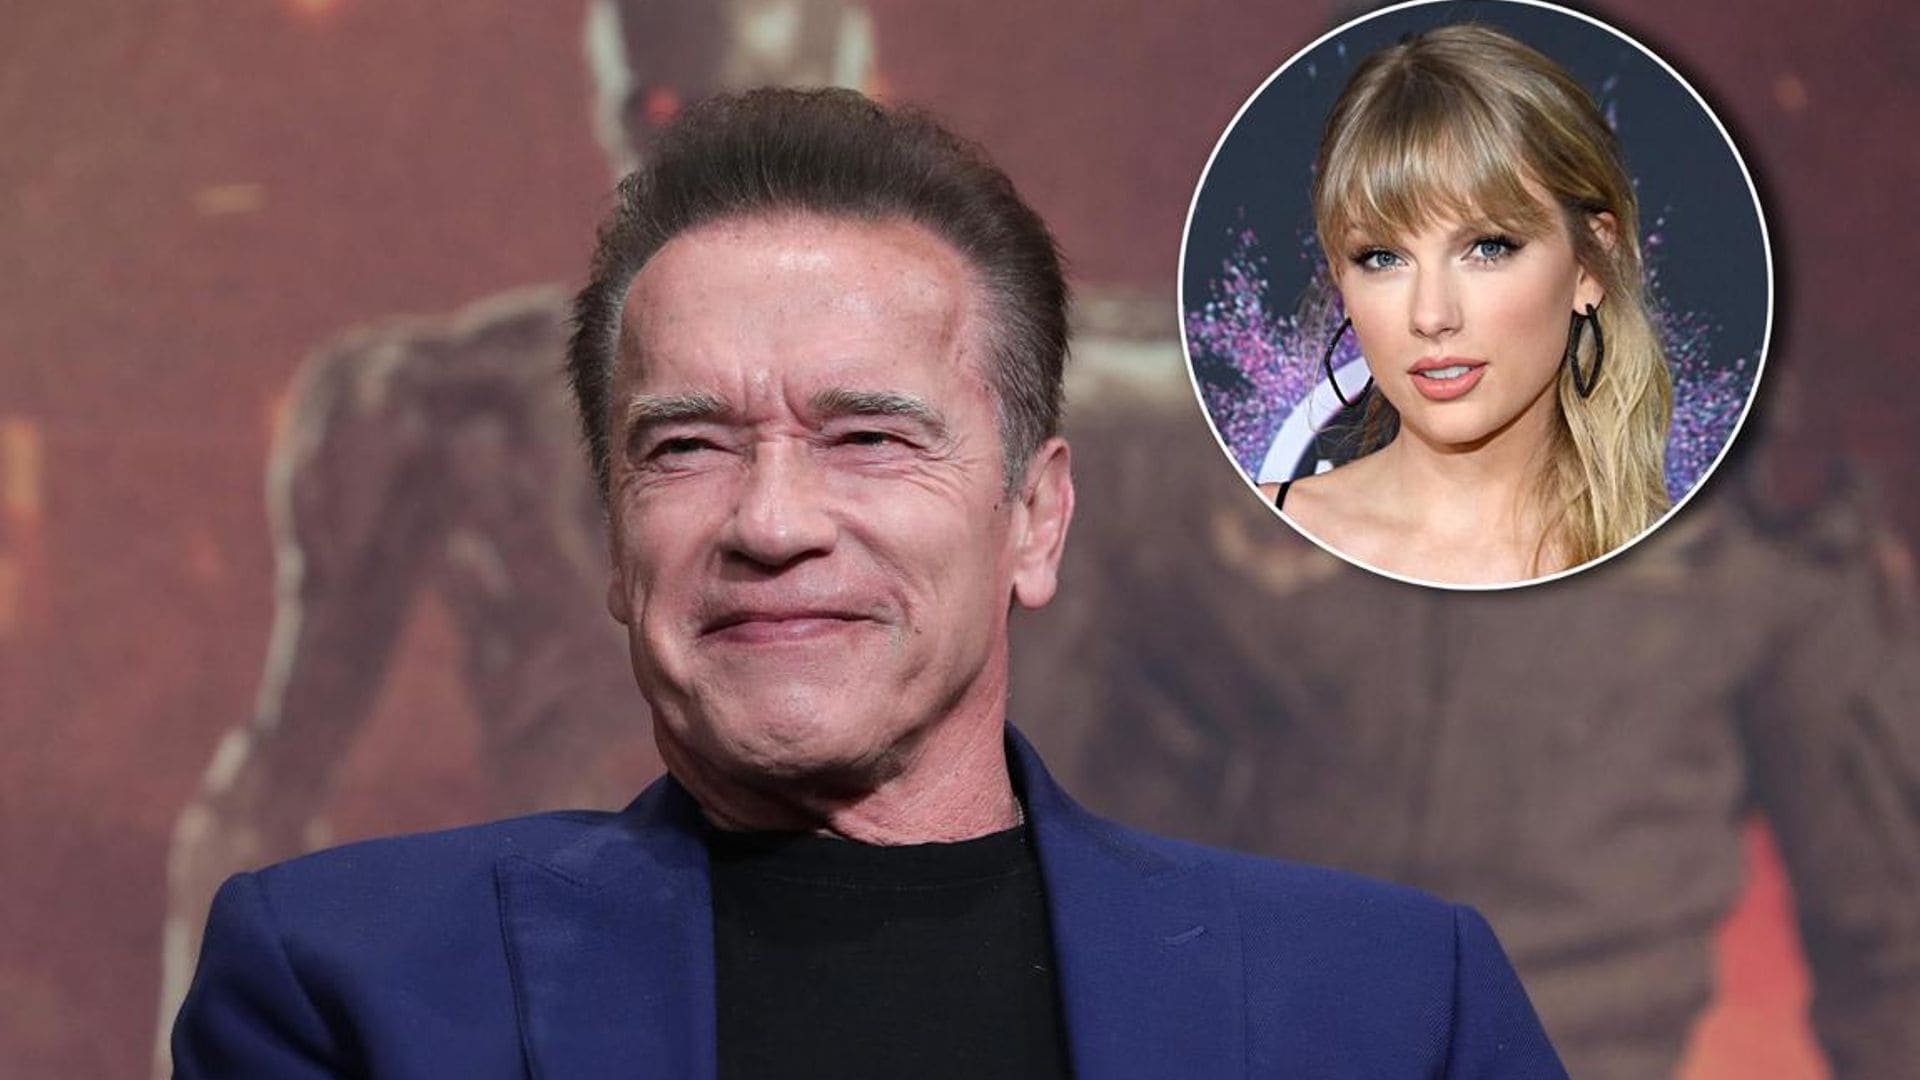 Arnold Schwarzenegger serves up motivation working out to Taylor Swift music: Watch